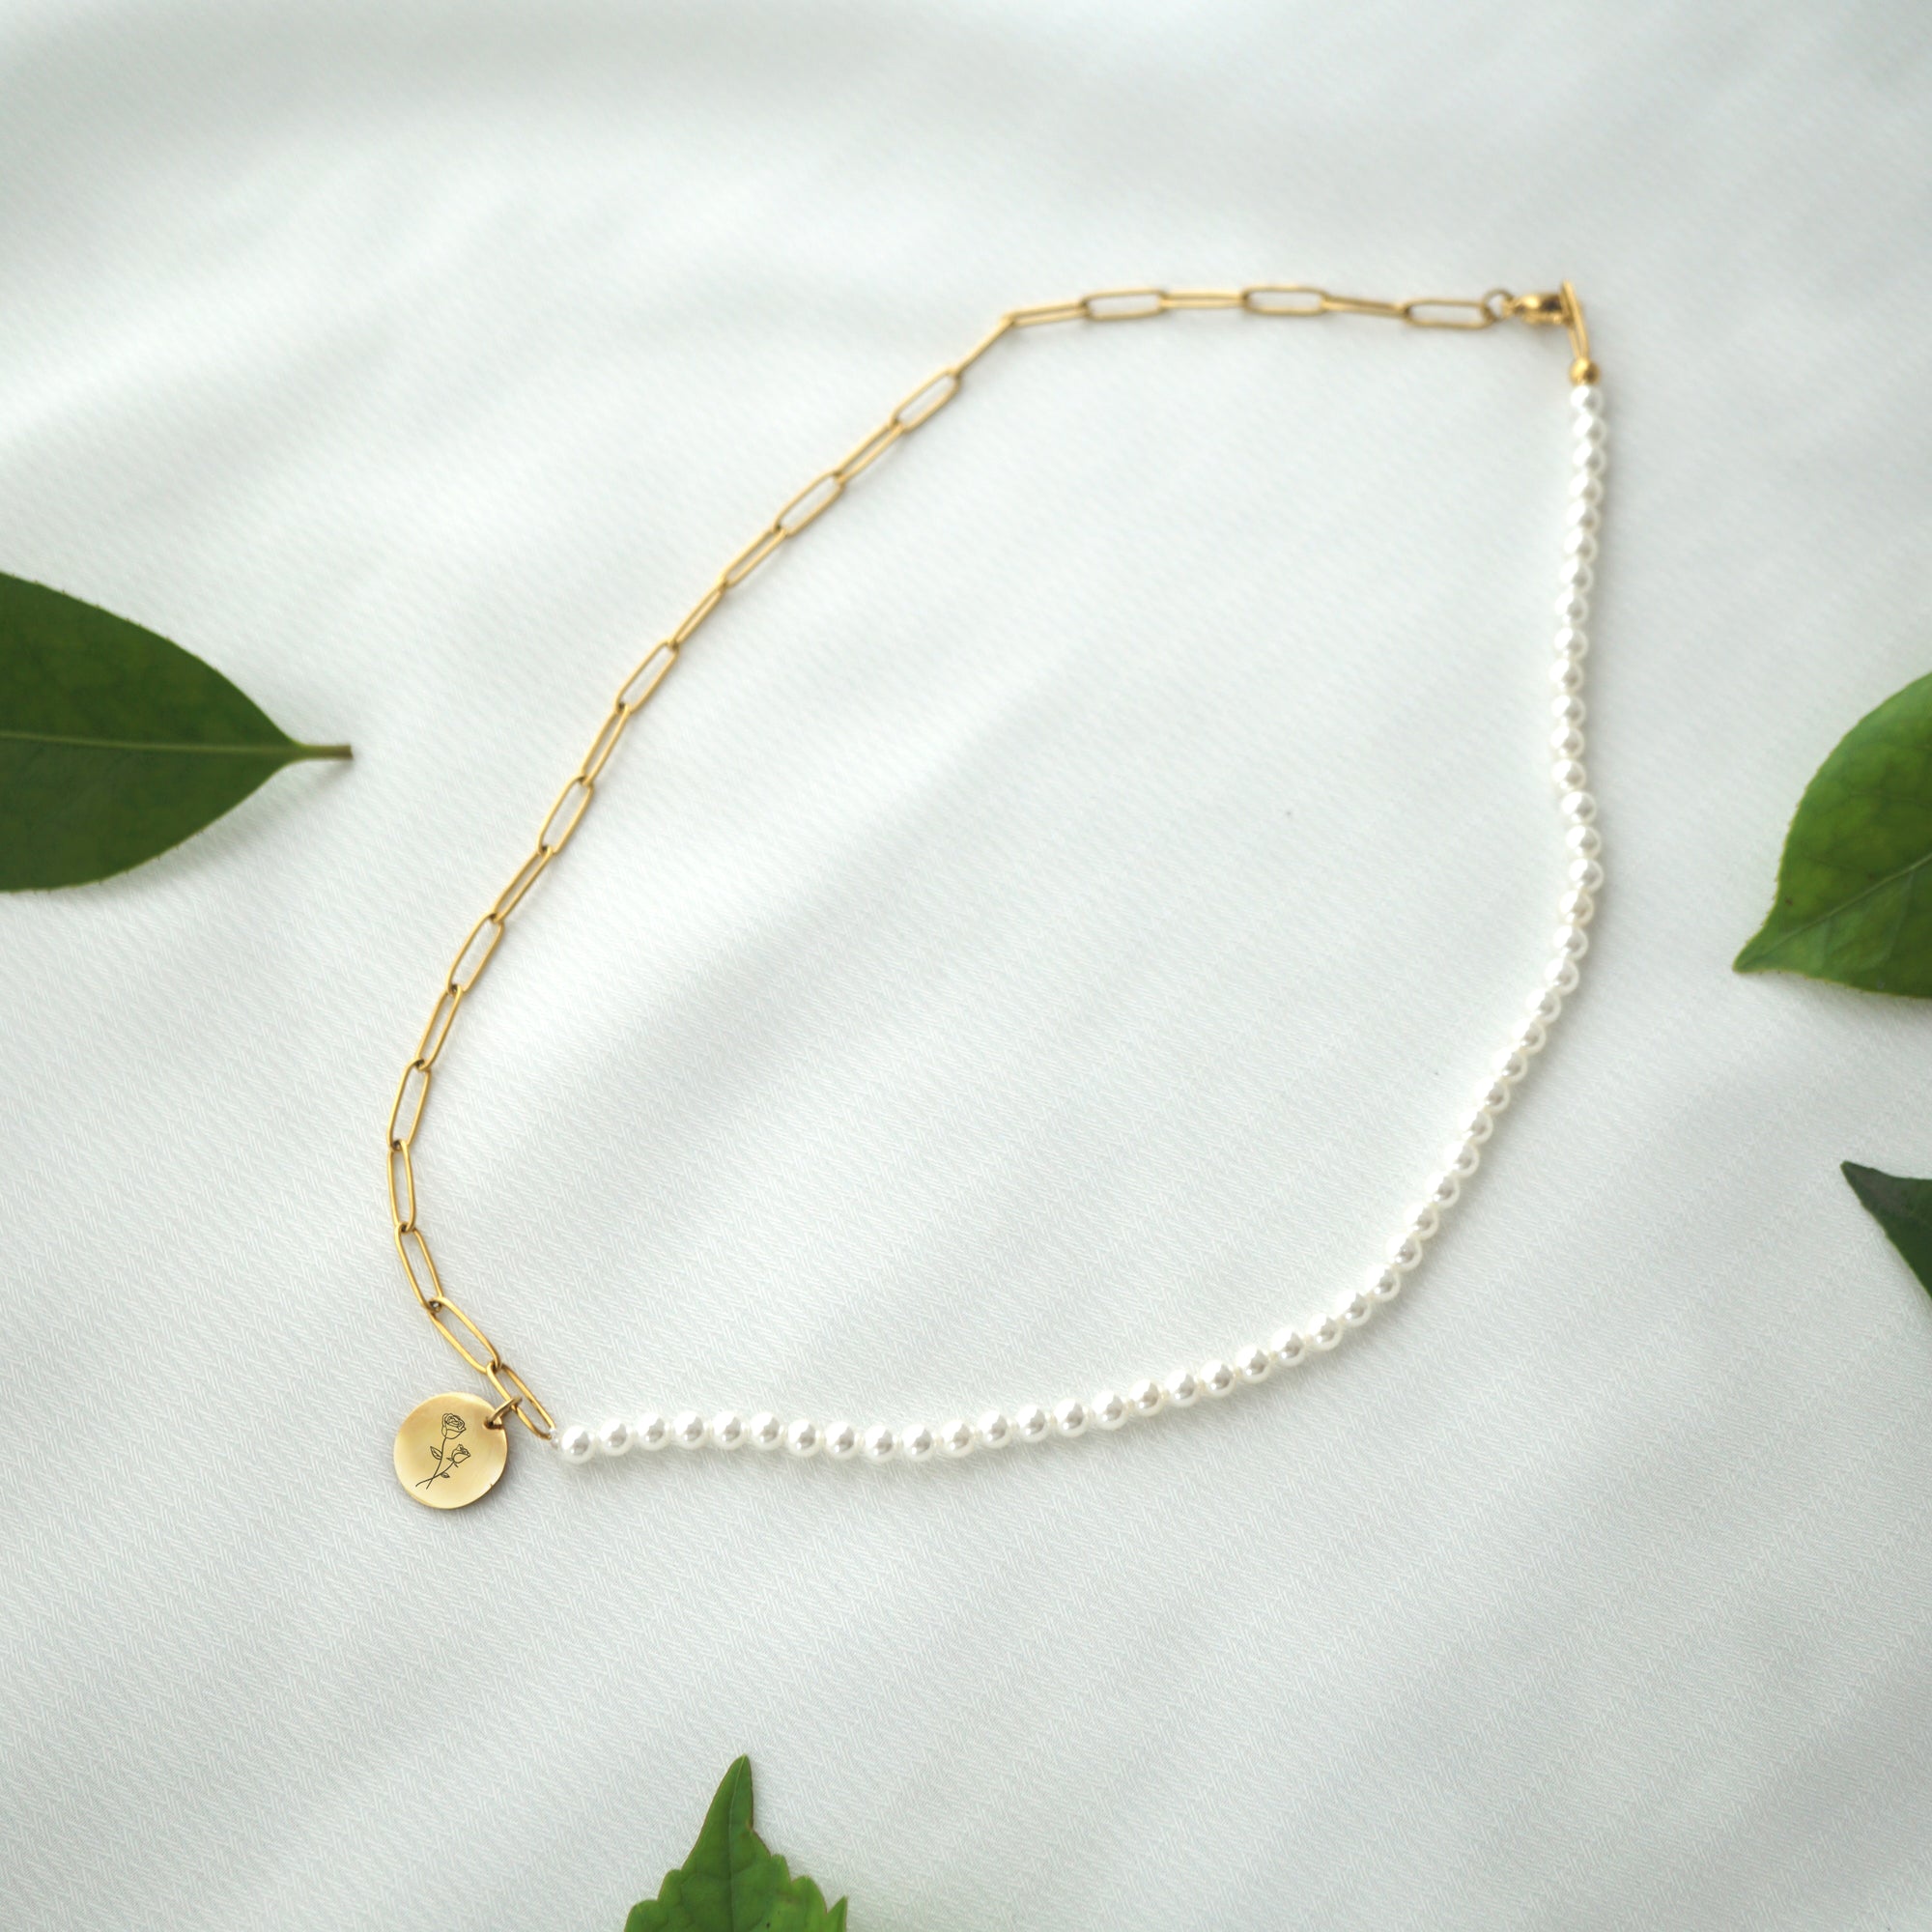 Engraved pearl personalized birth flower pendant necklace